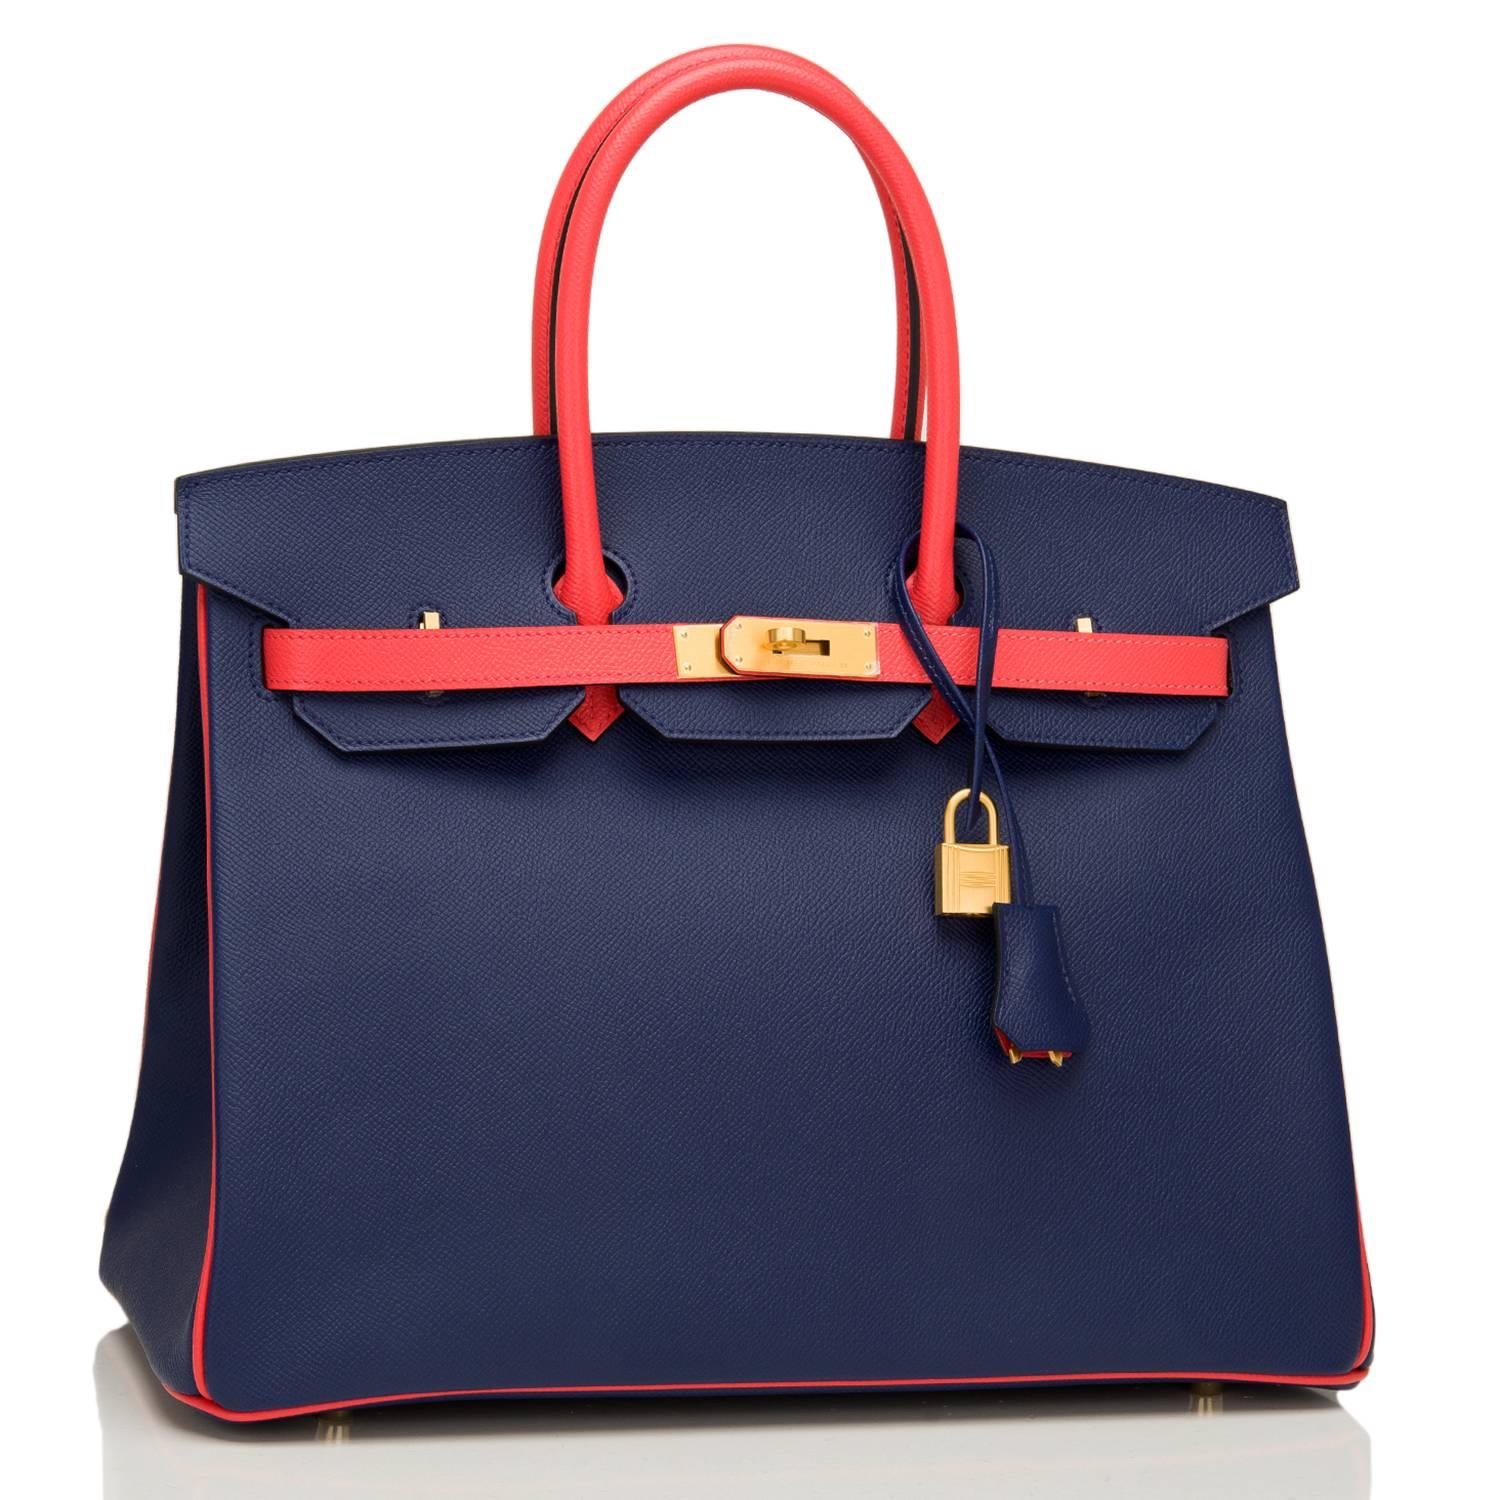 Hermes special order, horseshoe stamped (HSS) bi-color Birkin 35cm of Blue Sapphire and Rose Jaipur epsom leather with gold hardware.

This Birkin has tonal stitching, a front toggle closure, a clochette with lock and two keys, and double rolled